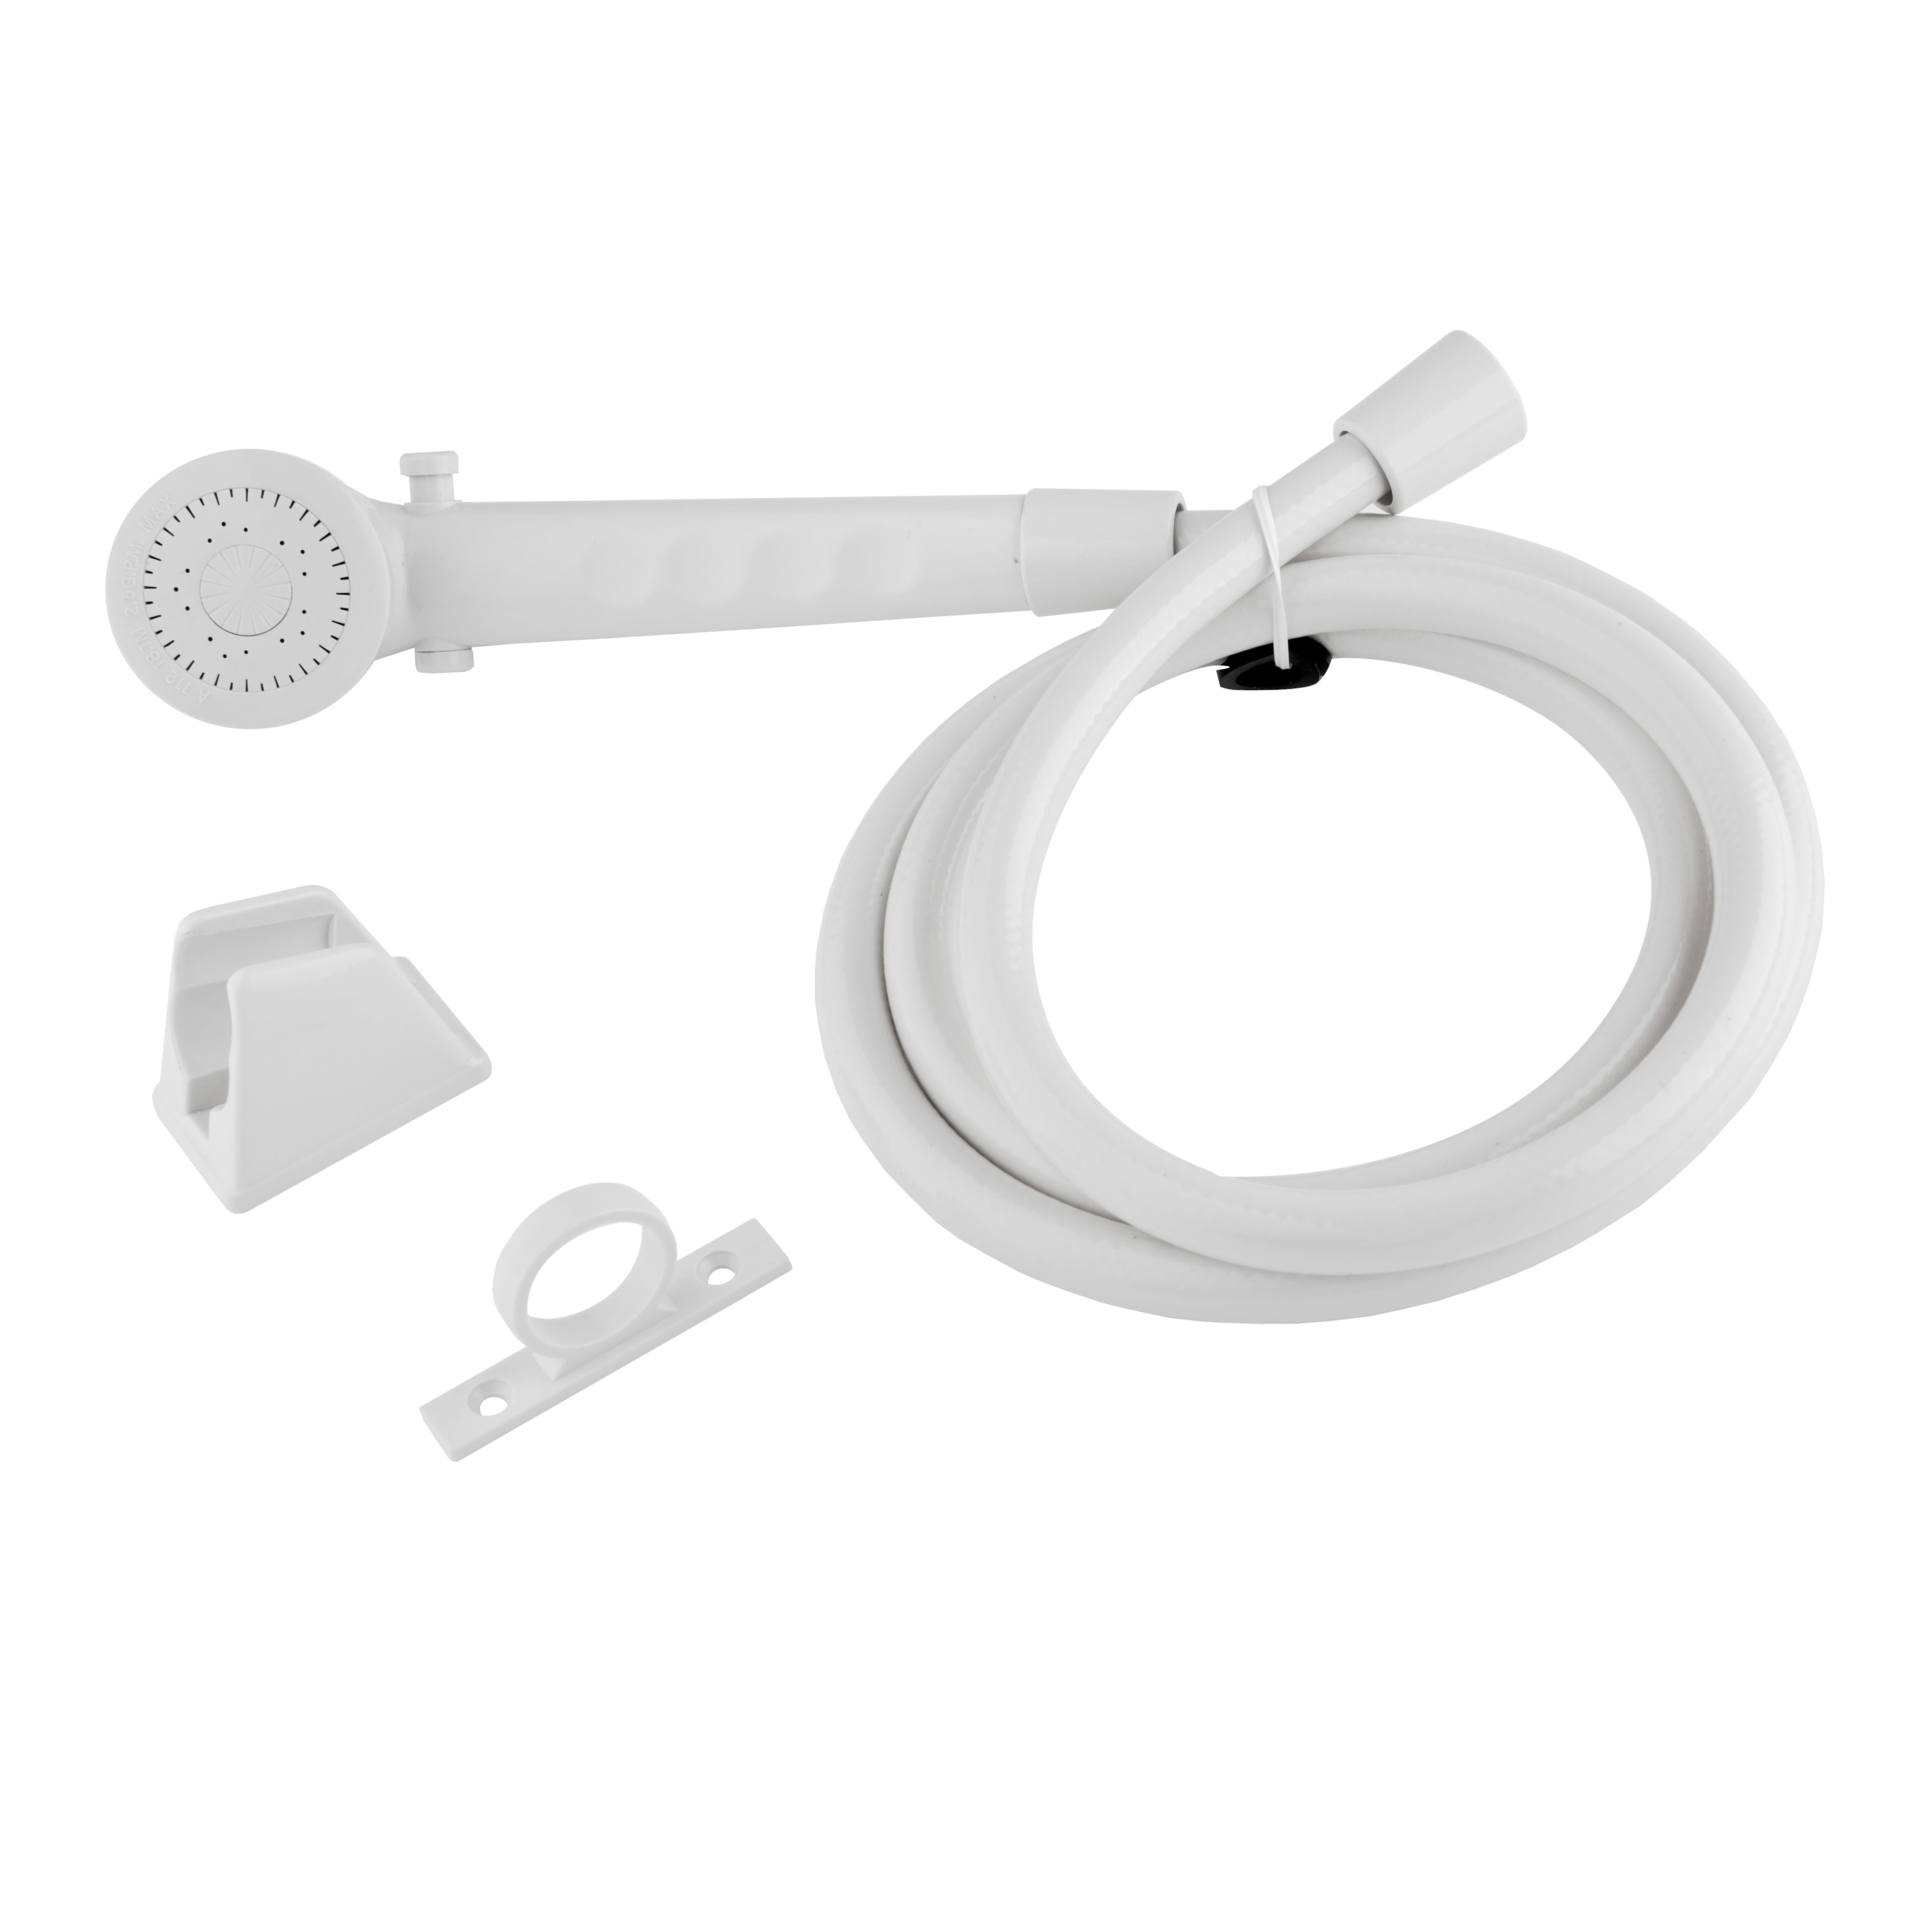 Dura Faucet RV Shower Hose Ring Shower Accessory Replacements Brushed Satin Nickel Features Easy Installation 